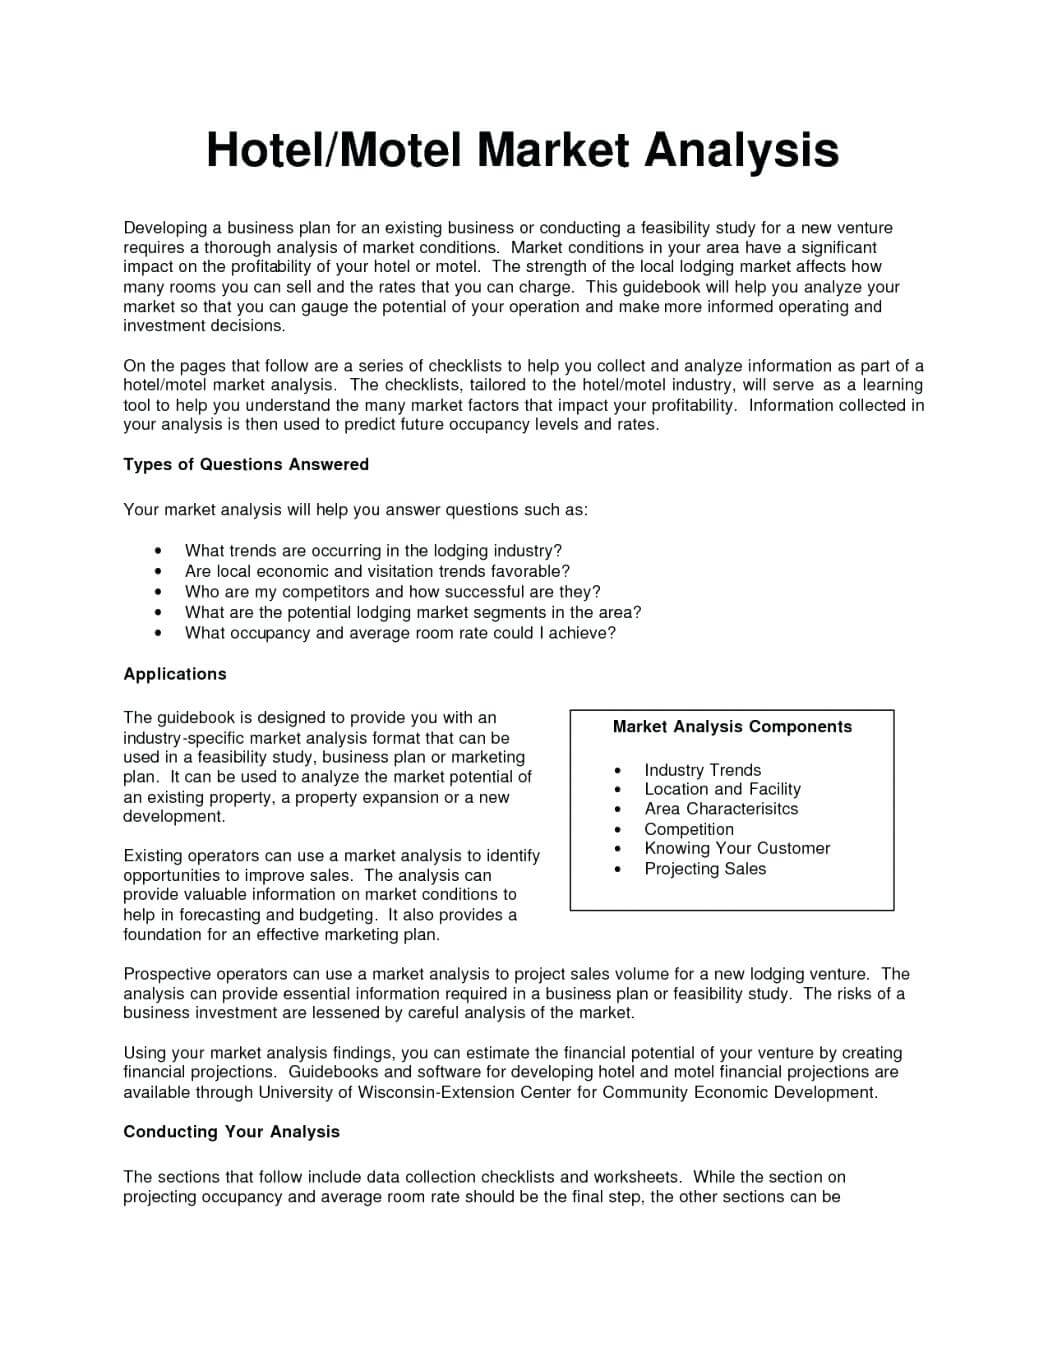 030 Business Plan Marketing Hotel And Motel Analysis Example Regarding Industry Analysis Report Template